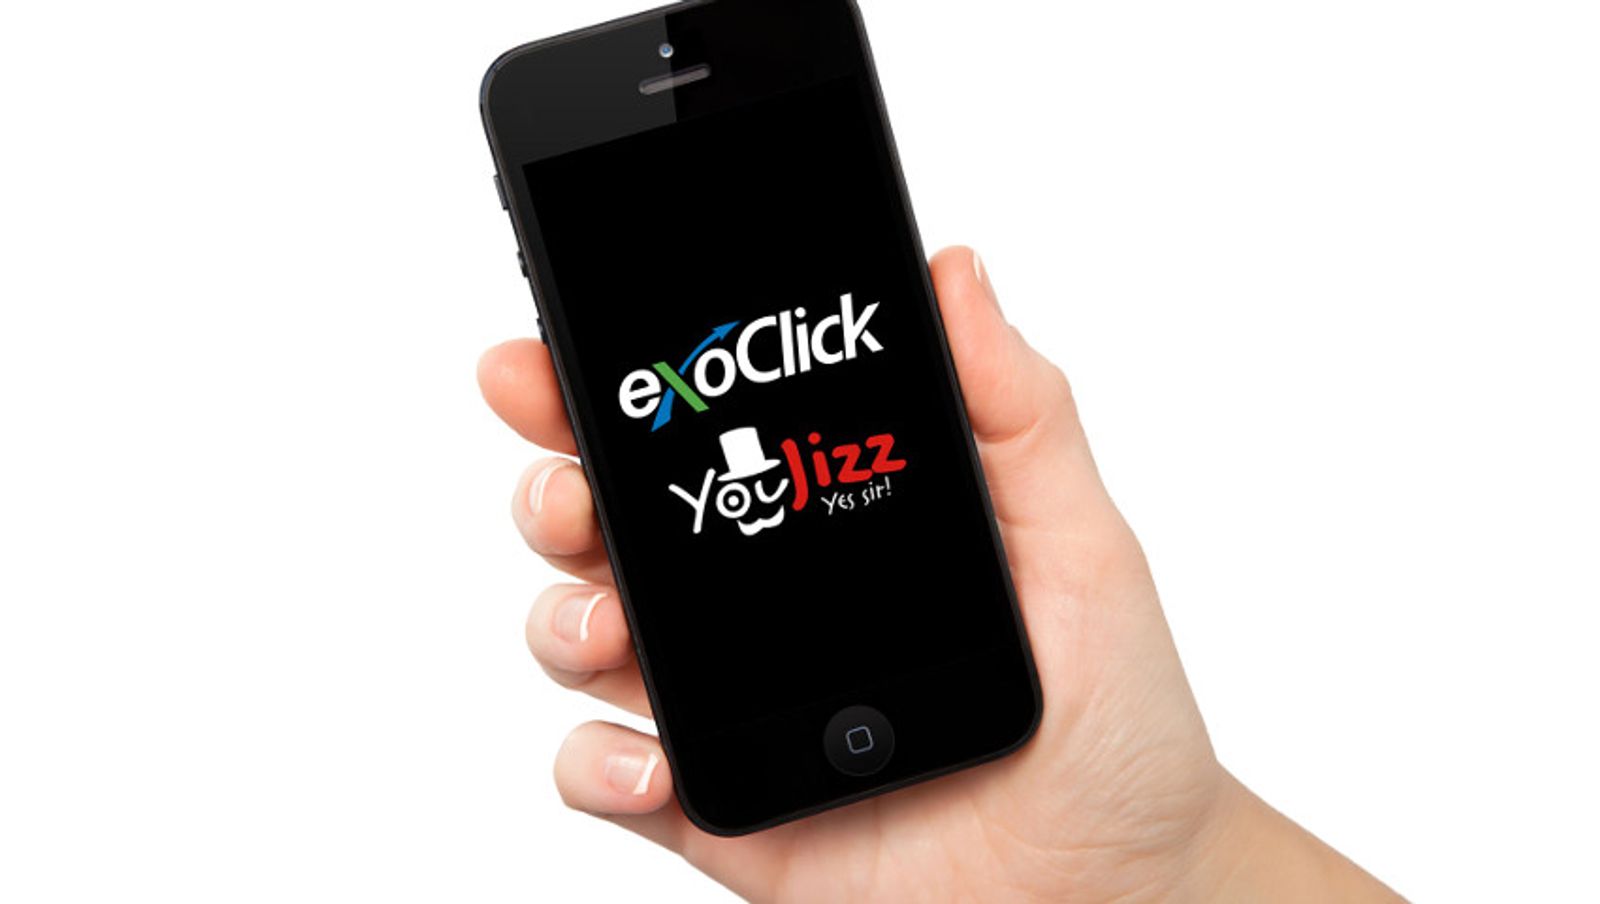 ExoClick Offers Exclusive YouJizz Mobile Interstitial Ad Spot